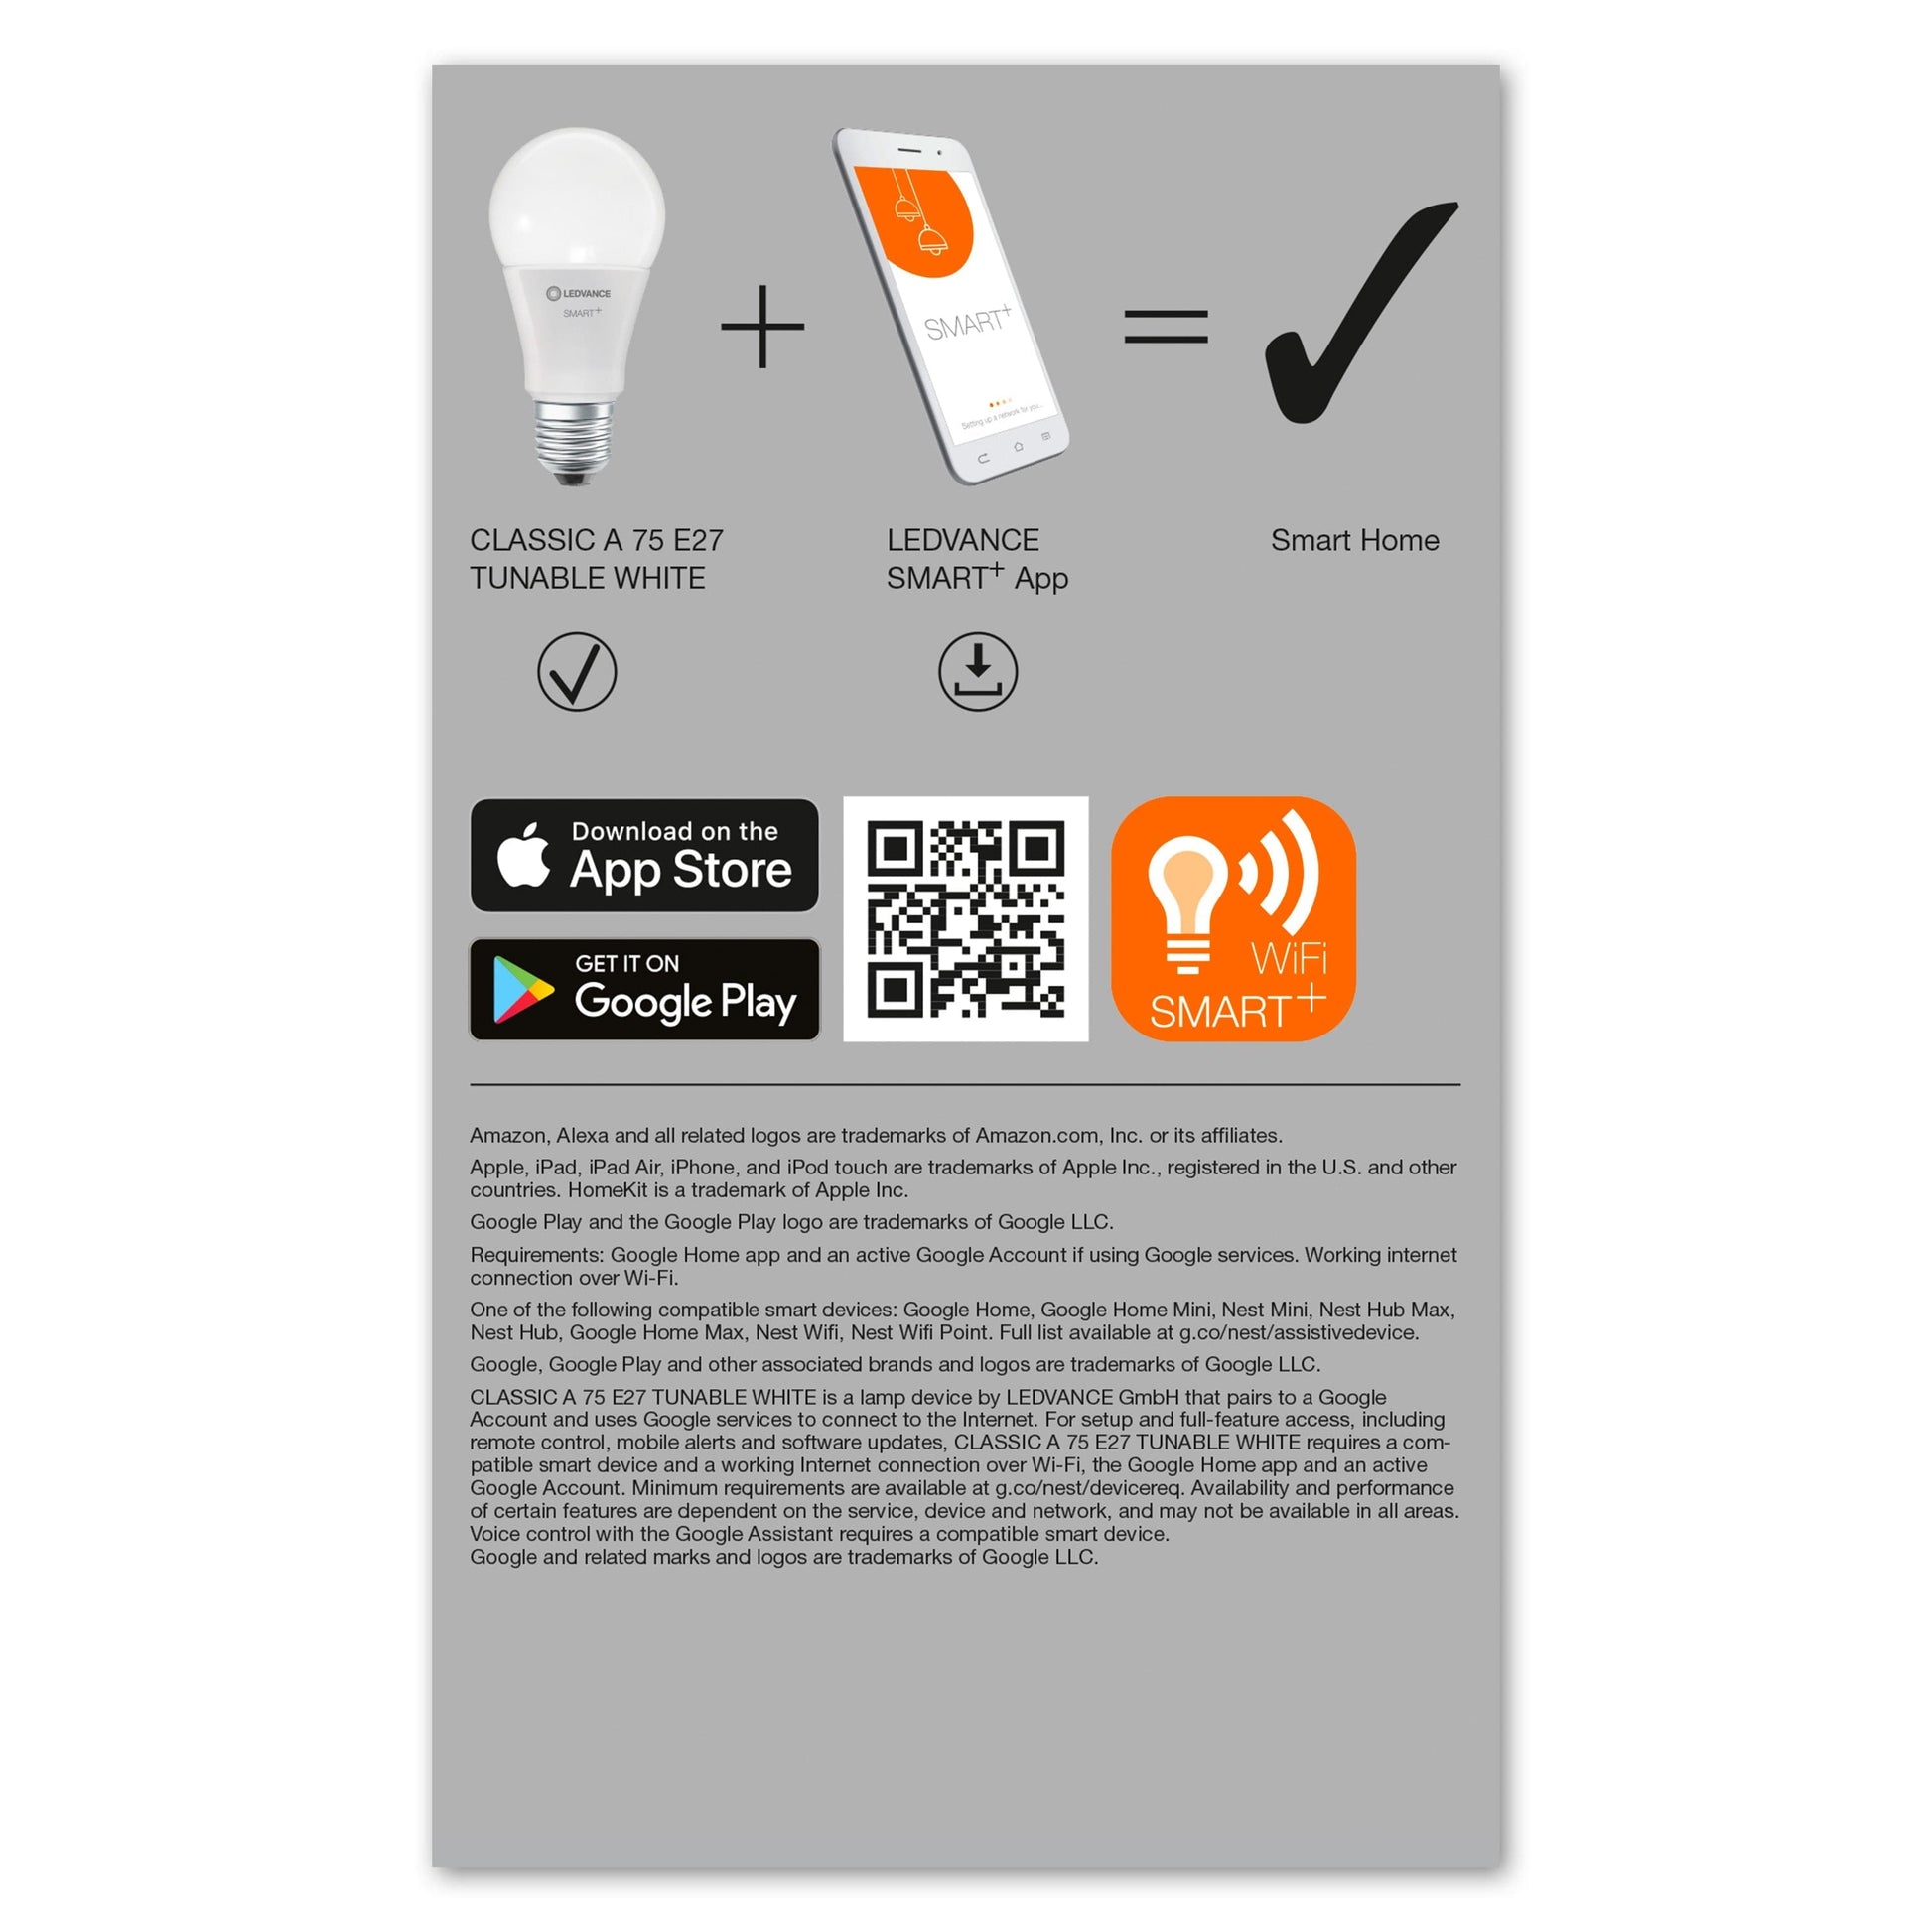 LED BULB SMART E27=75W FROSTED DROP CCT